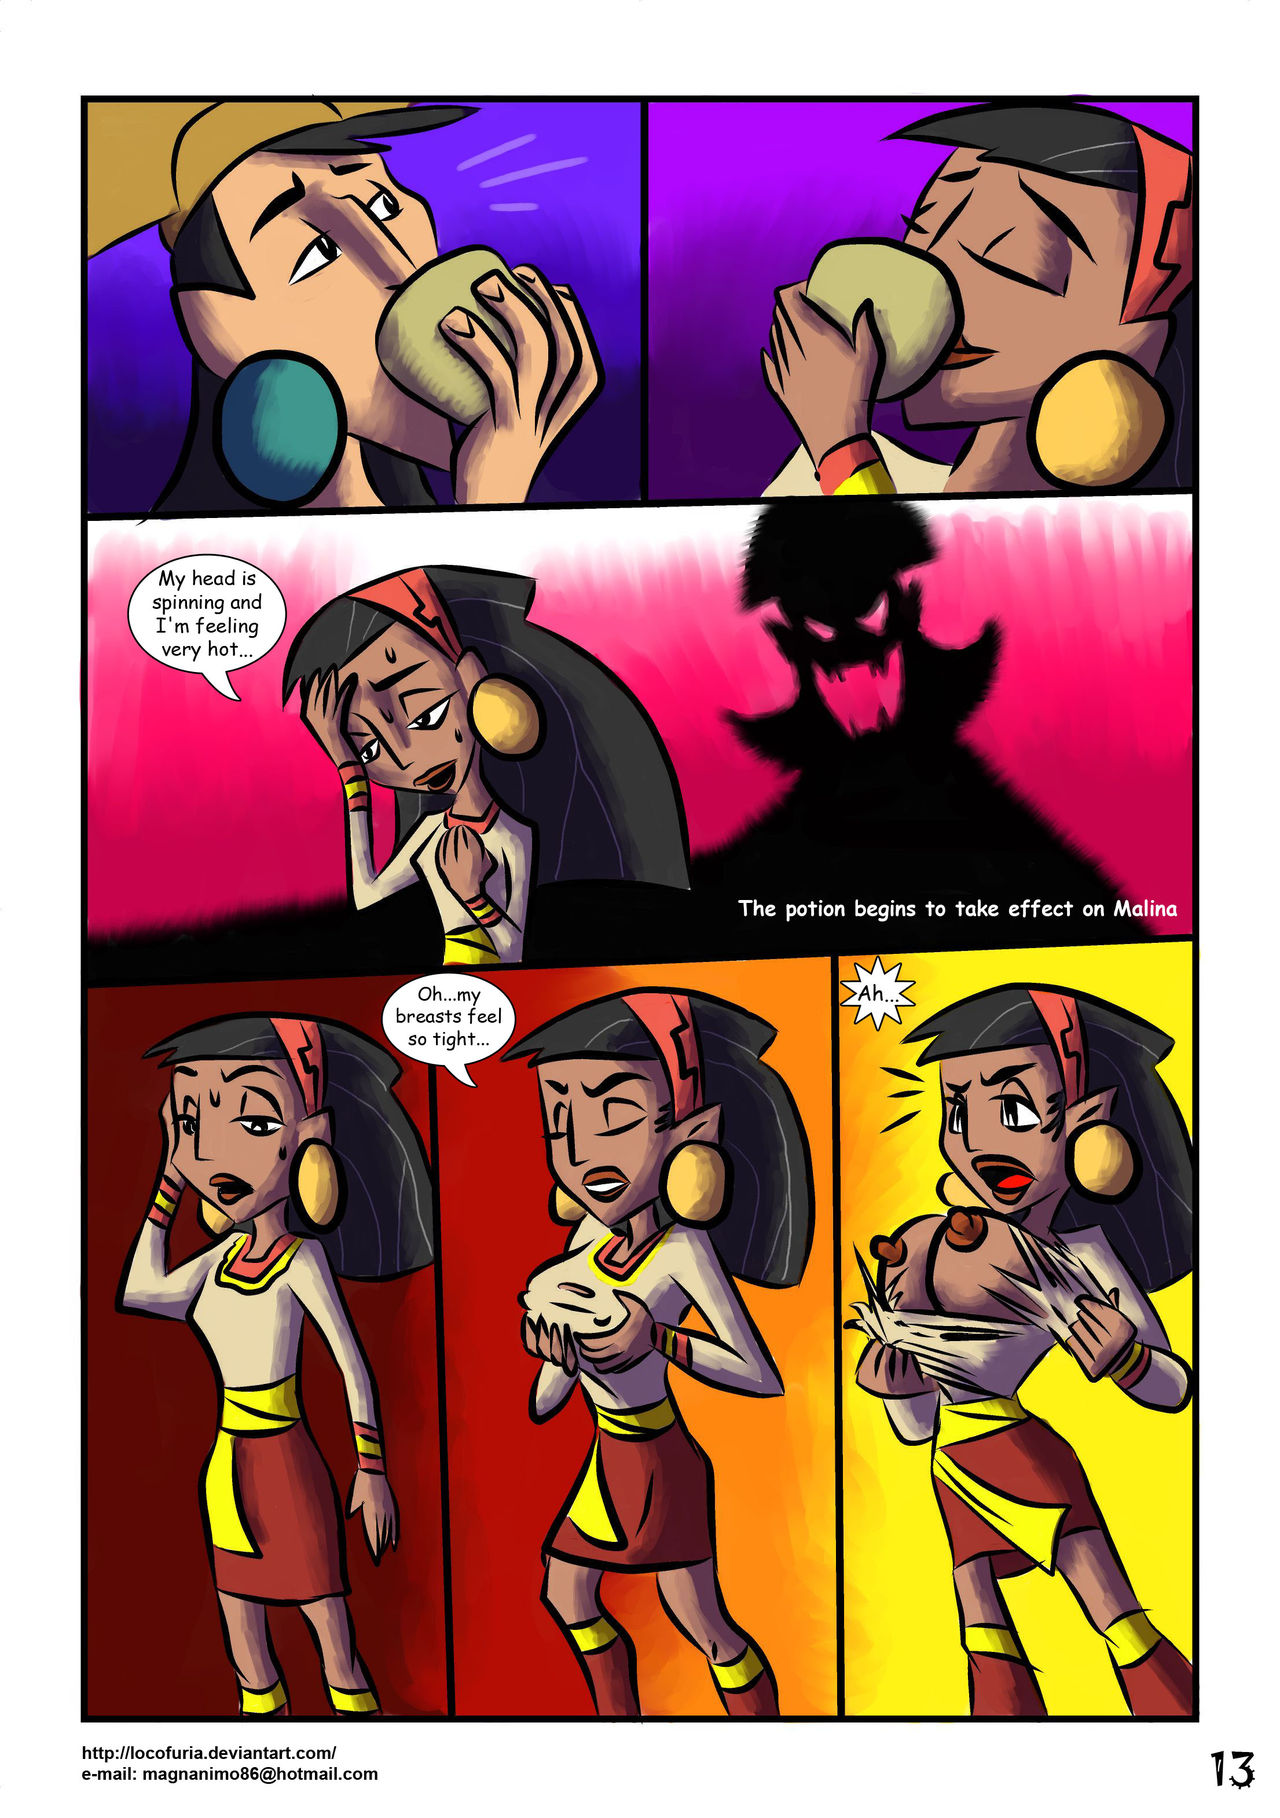 Naughty Mischief (The Emperorâ€™s New Groove) by Silverbulletproof.